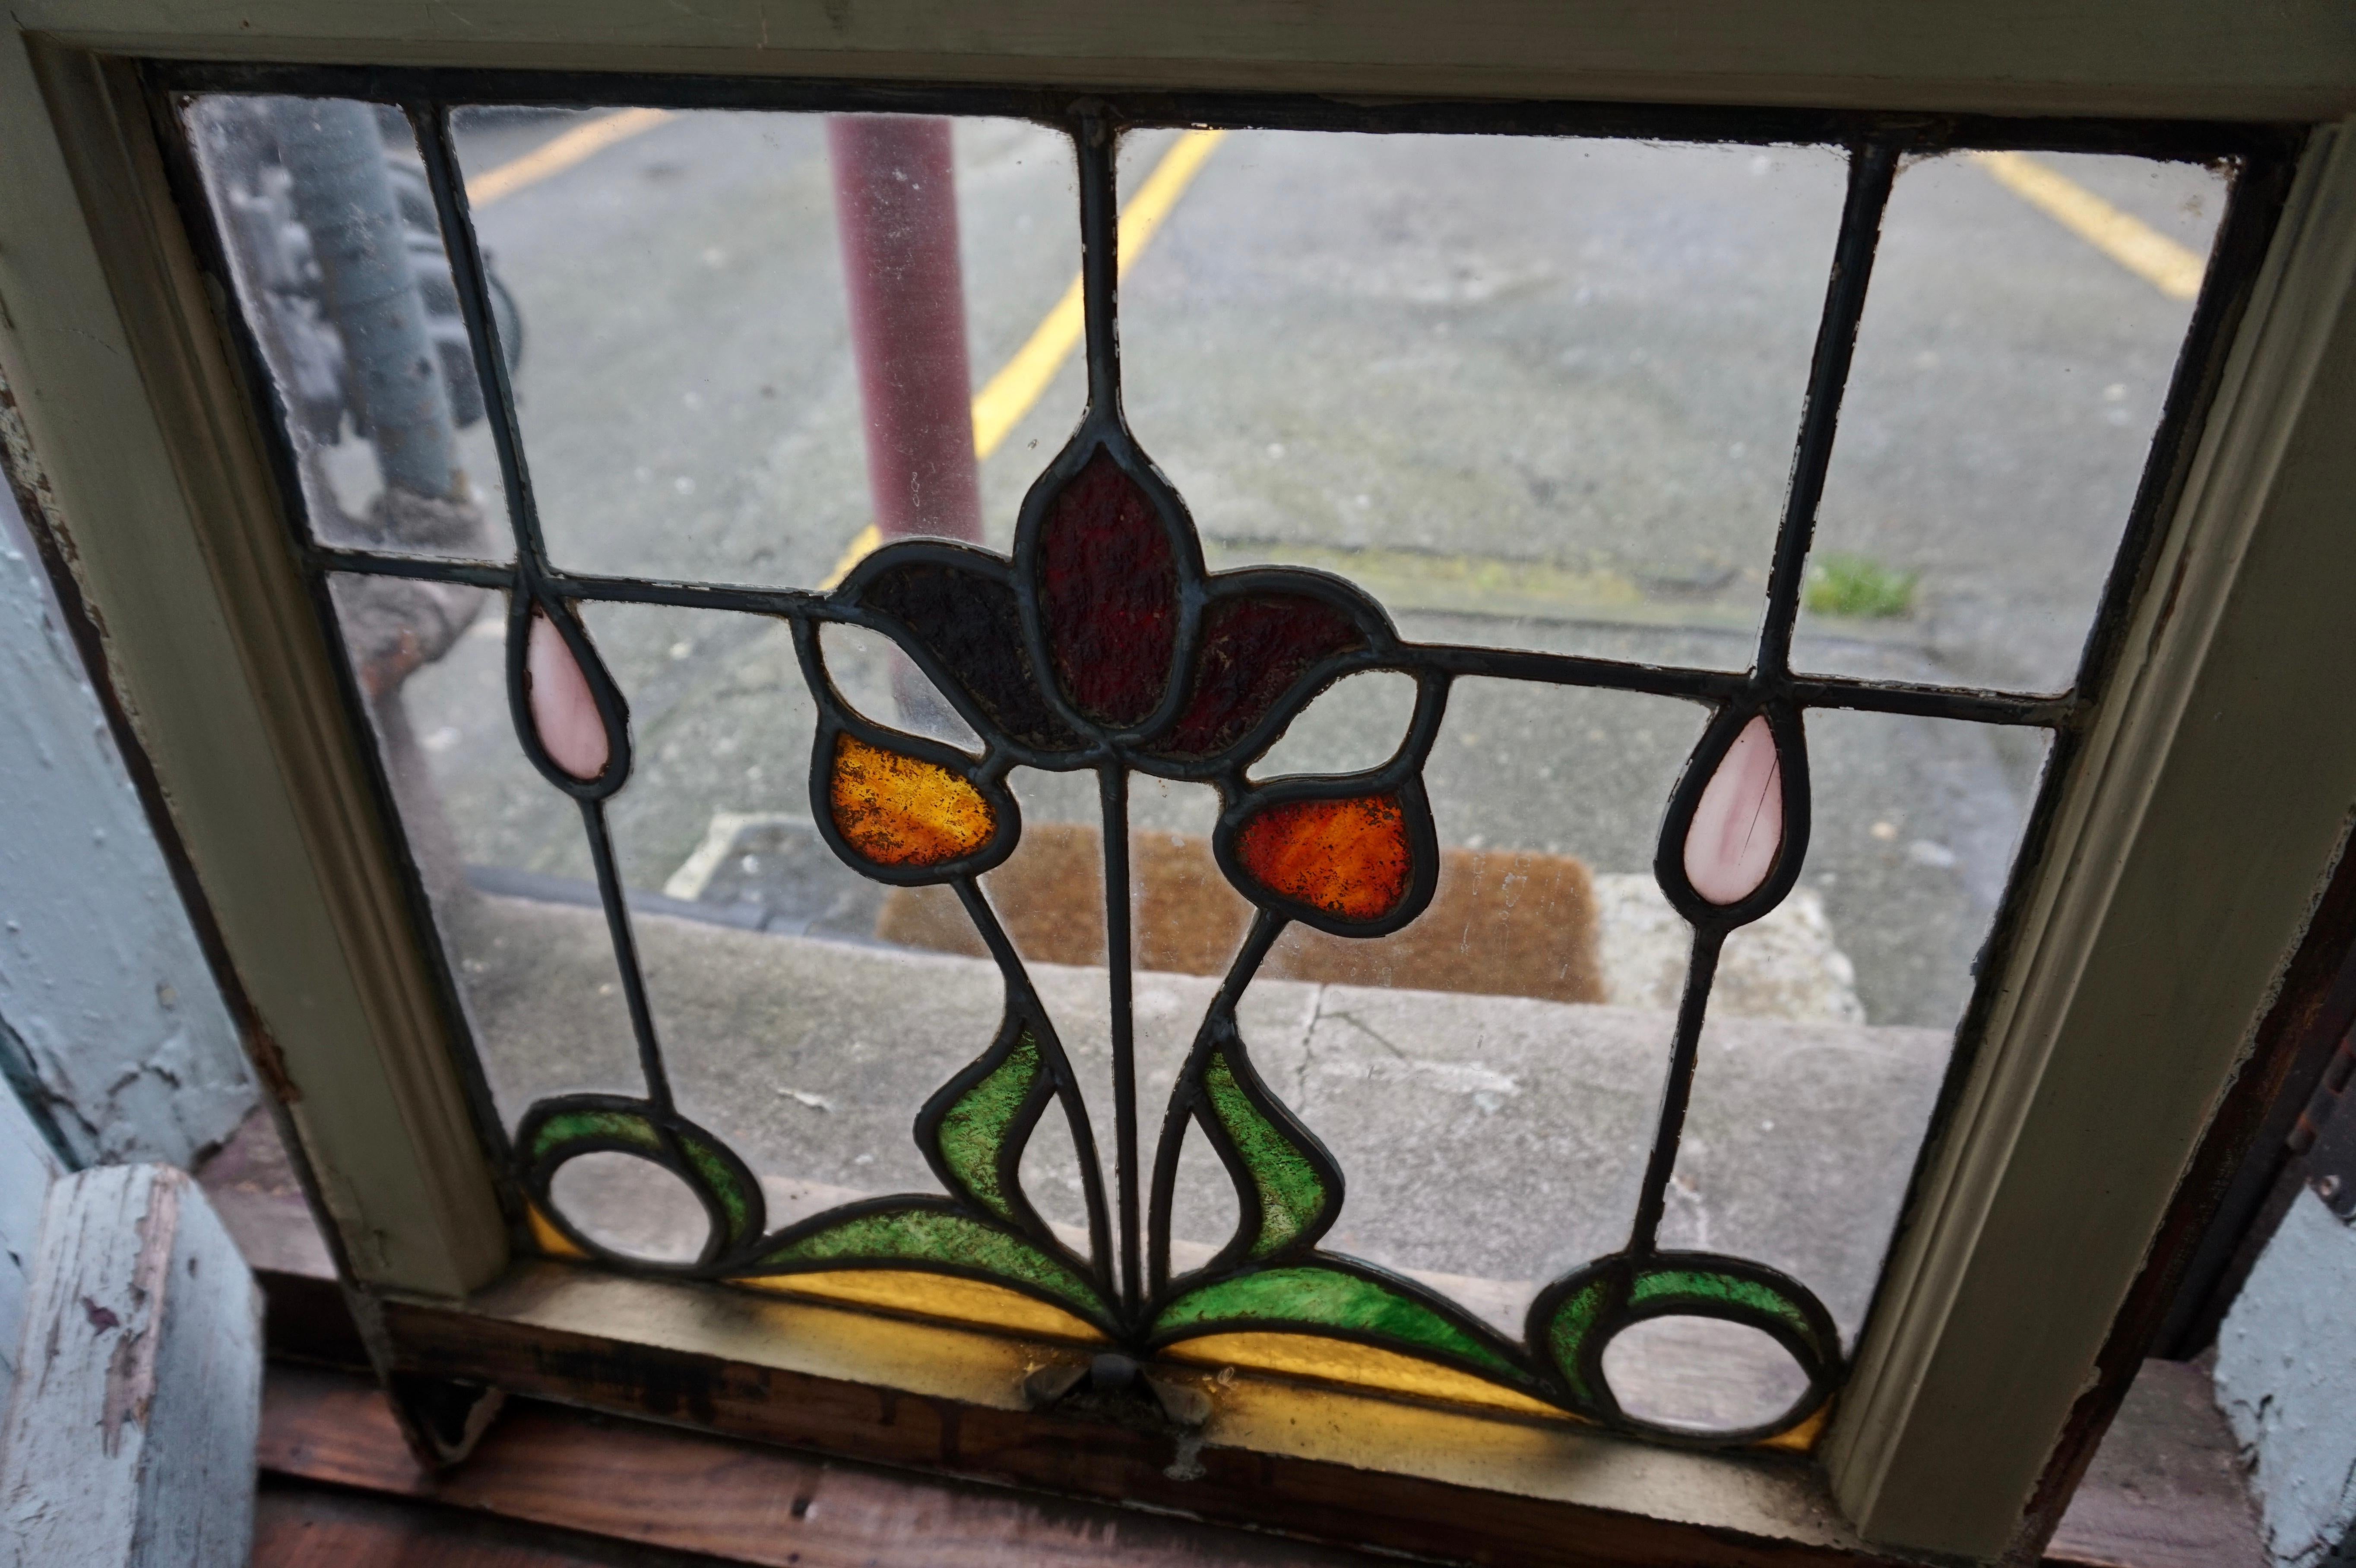 Hard to capture the beauty of these rare stained glass Art Nouveau windows. They come alive when let by natural sunlight to display dazzling warm hues. In good overall condition with some age showing on the frame edges but overall sturdy. The